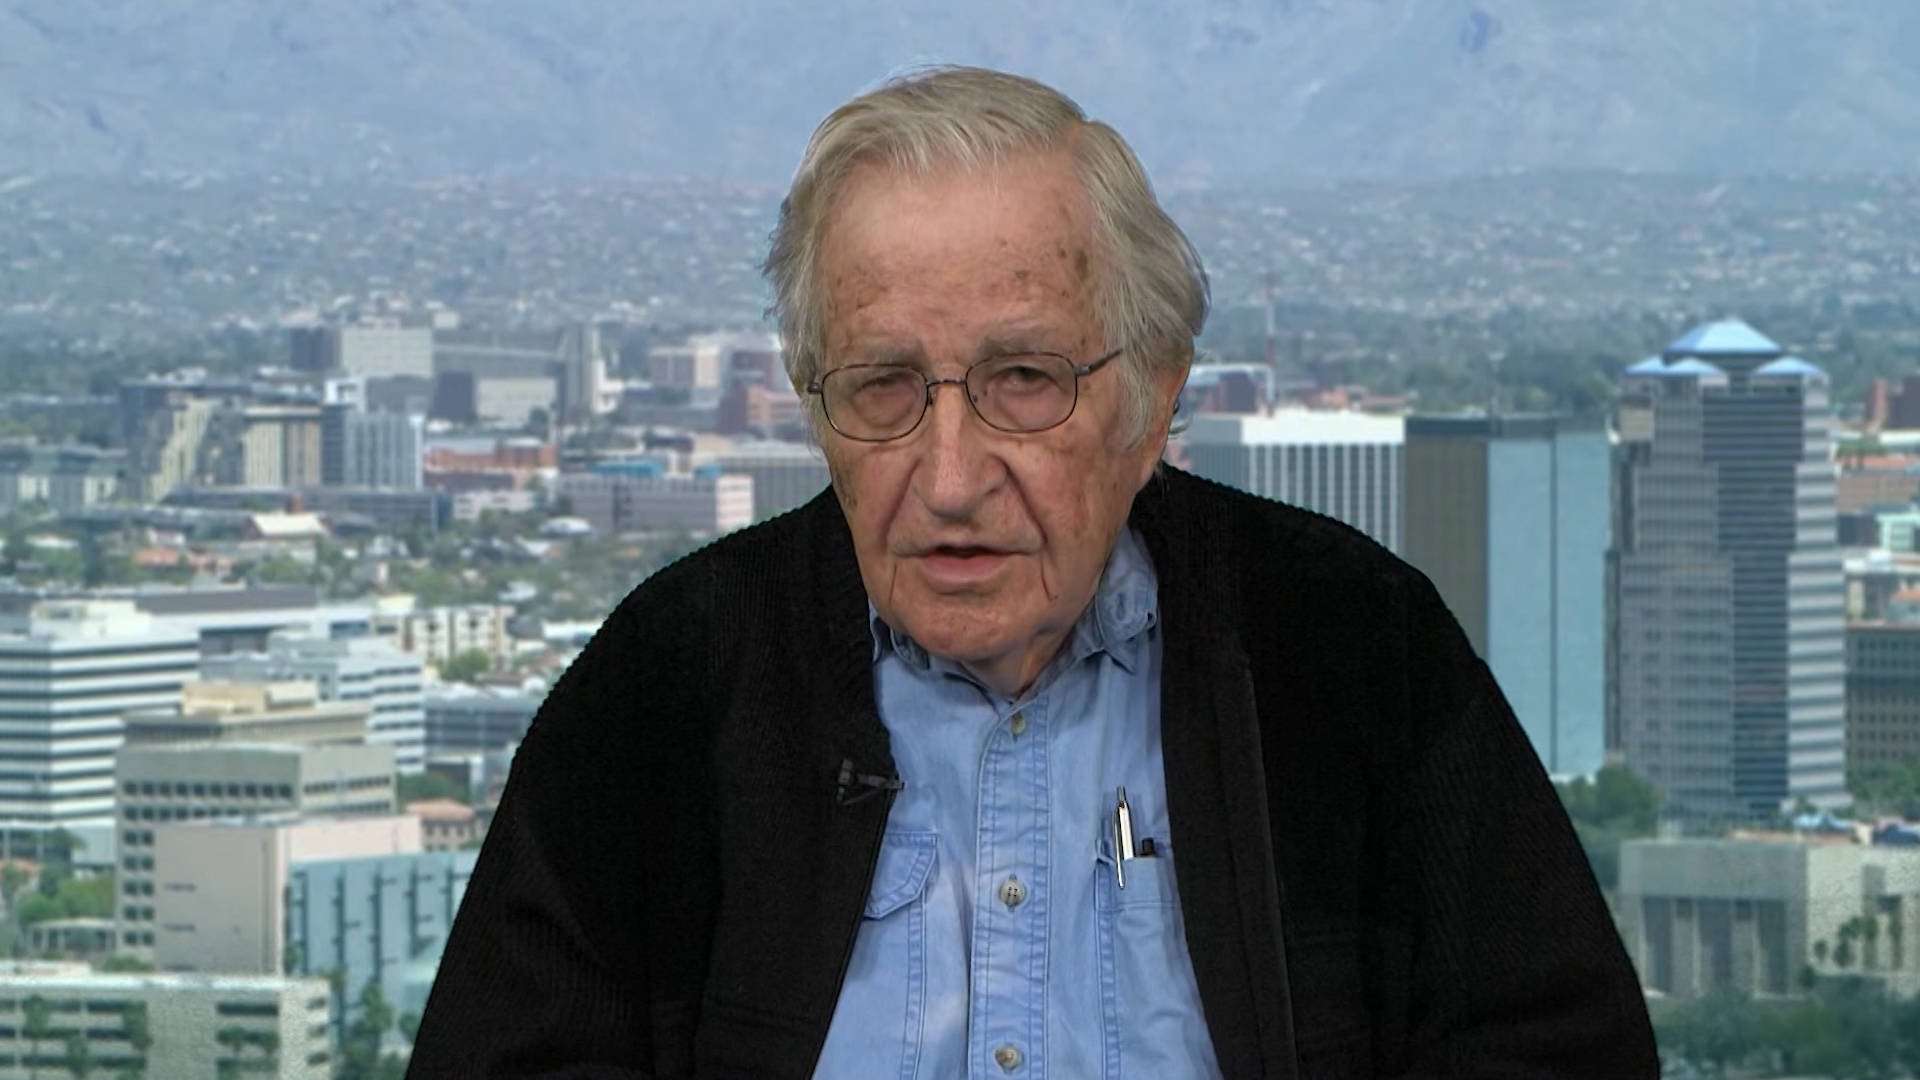 image for Noam Chomsky: The Future of Organized Human Life Is At Risk Thanks to GOP’s Climate Change Denial